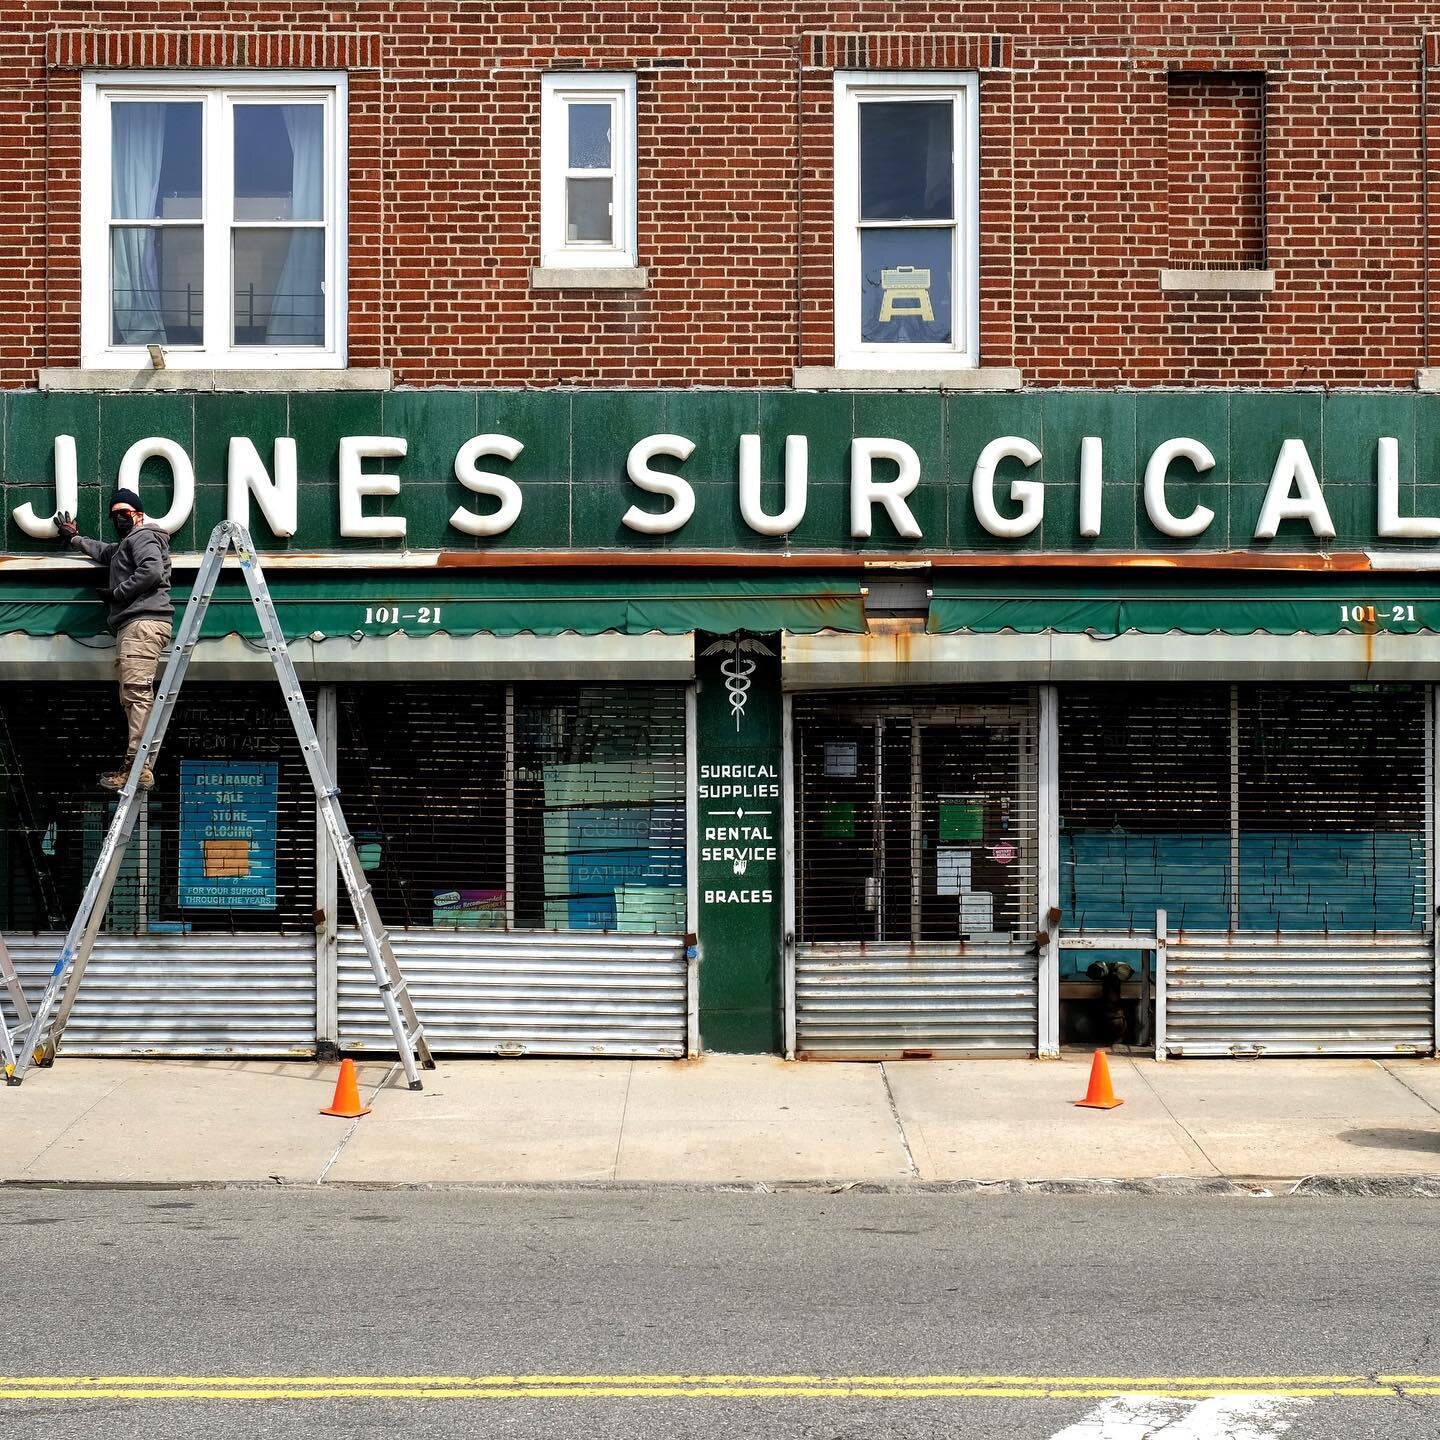 Hello! It&rsquo;s been a busy year of saving signs, and we have a lot to catch you all up on. This spring we were able to embark on one of our most exciting sign saves yet- an ENTIRE store facade! Jones Surgical Co. served the community of Forest Hil